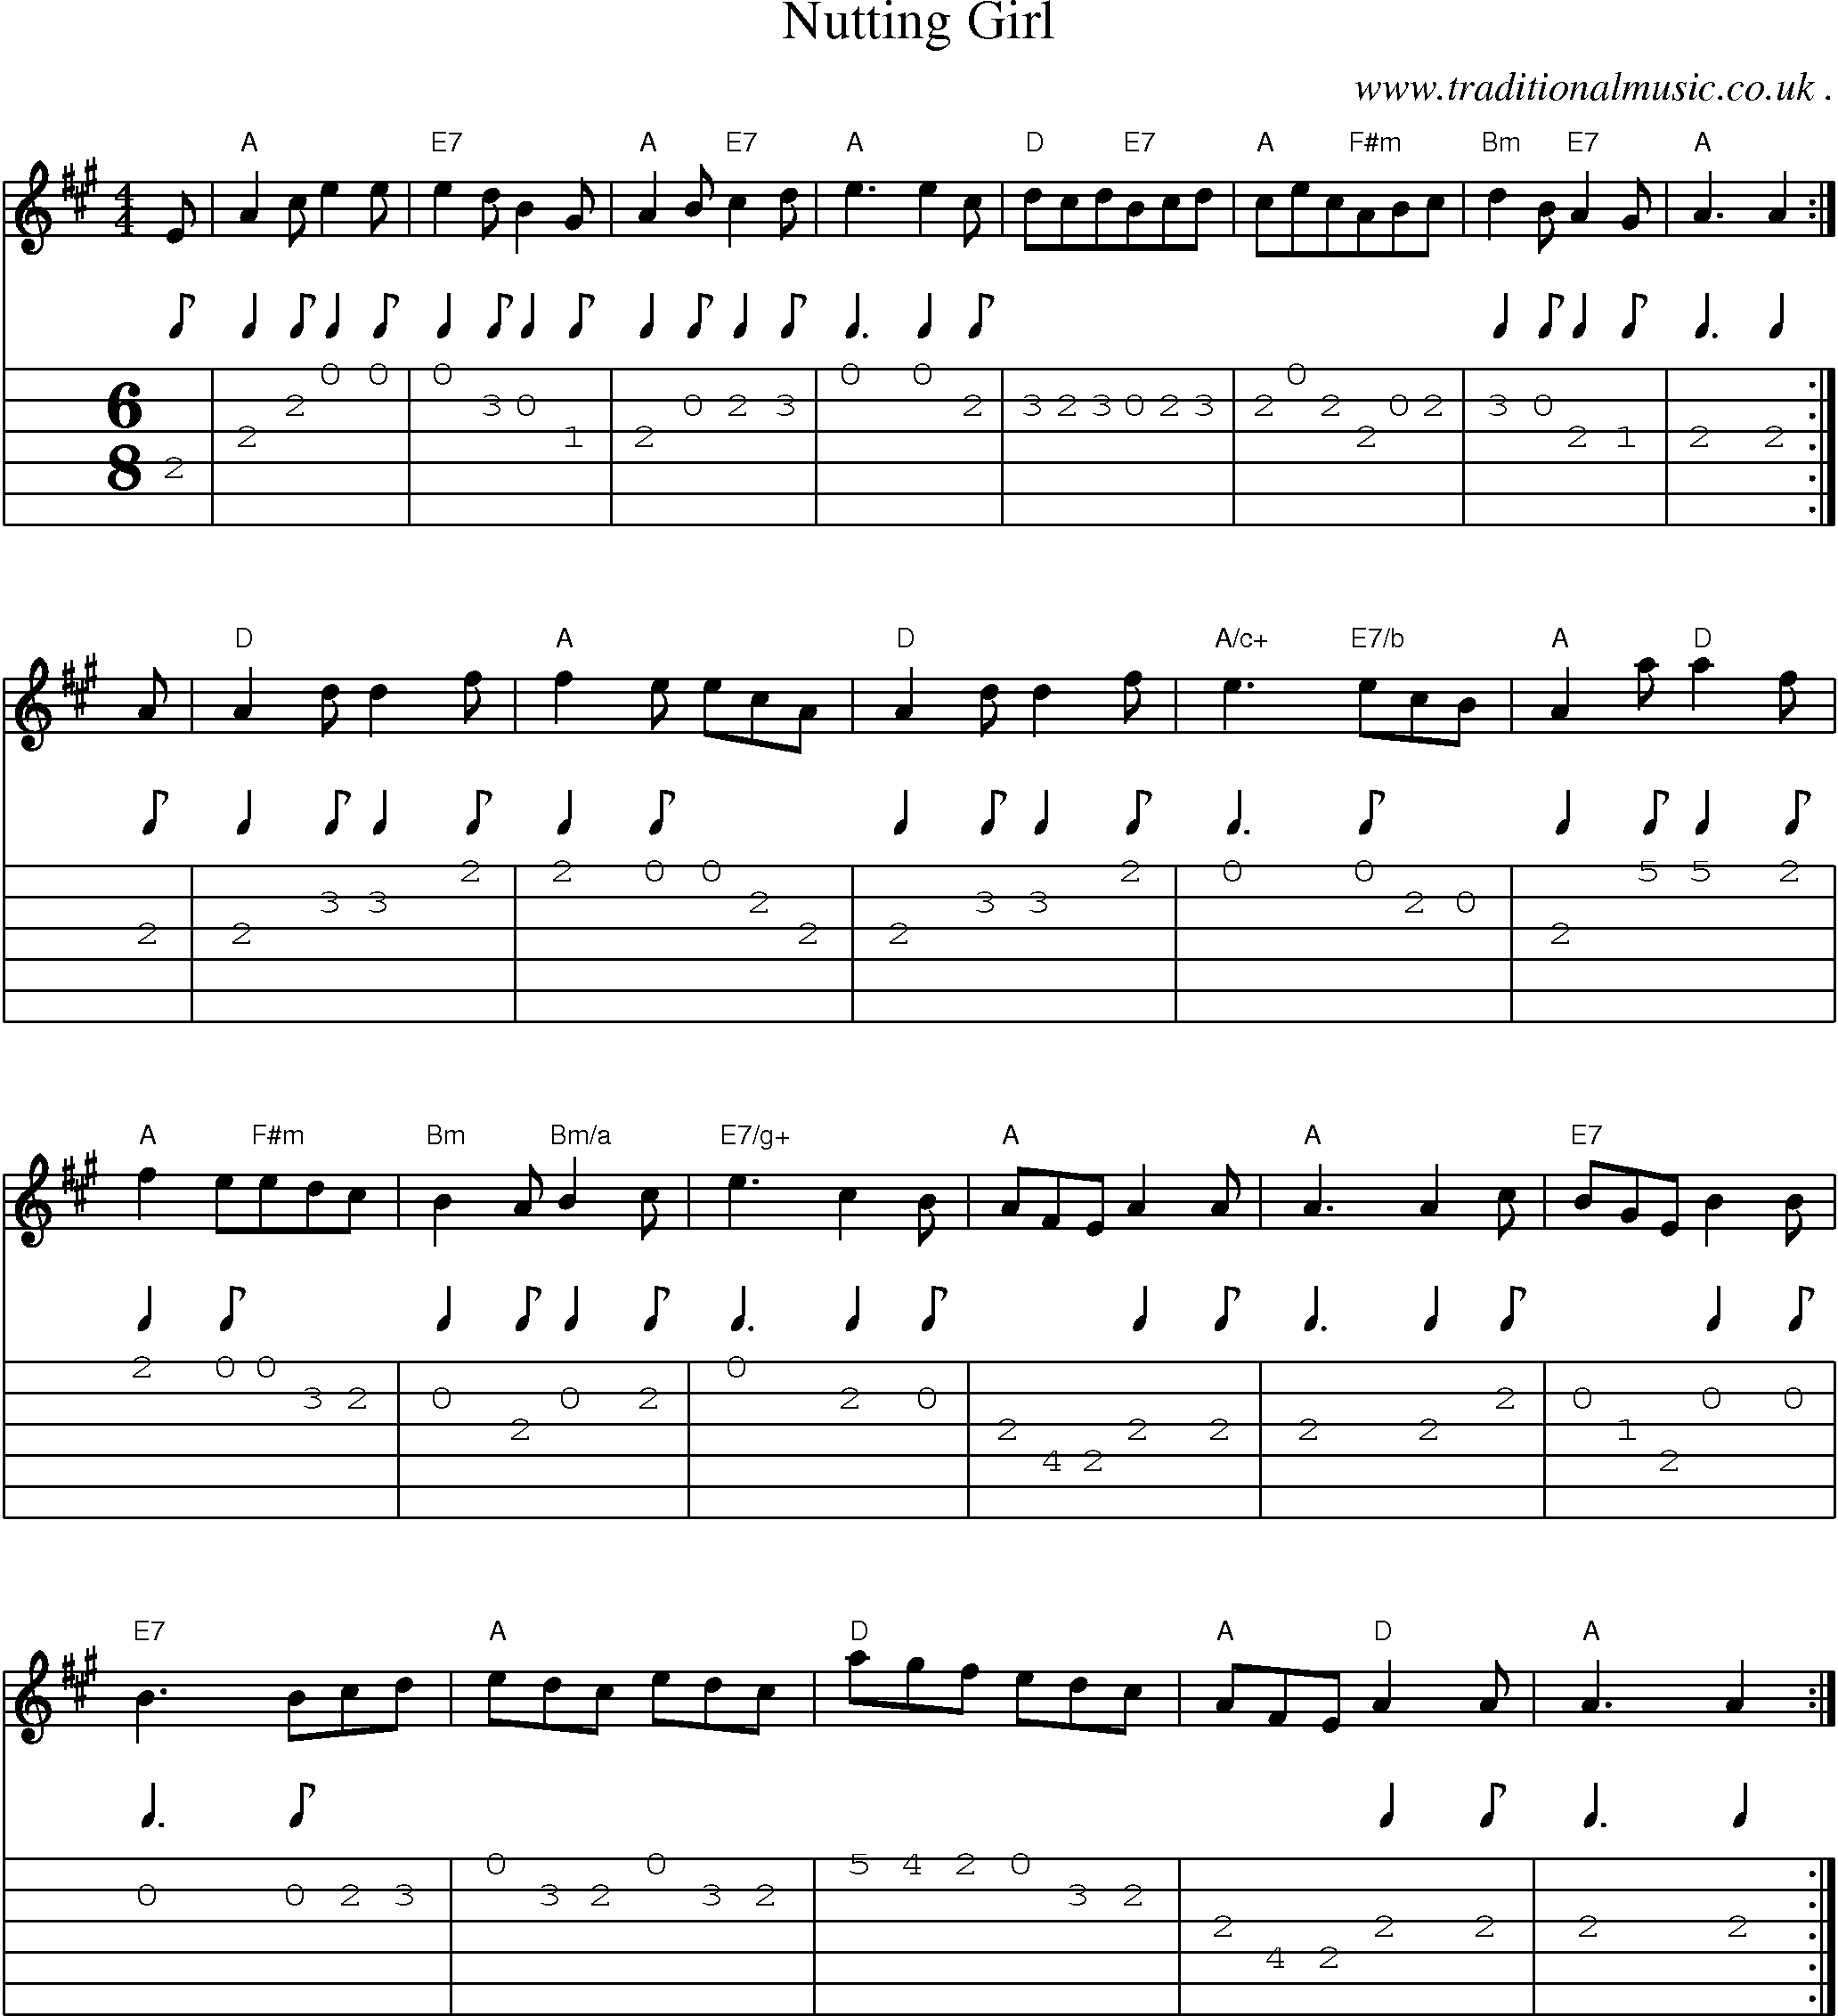 Sheet-Music and Guitar Tabs for Nutting Girl